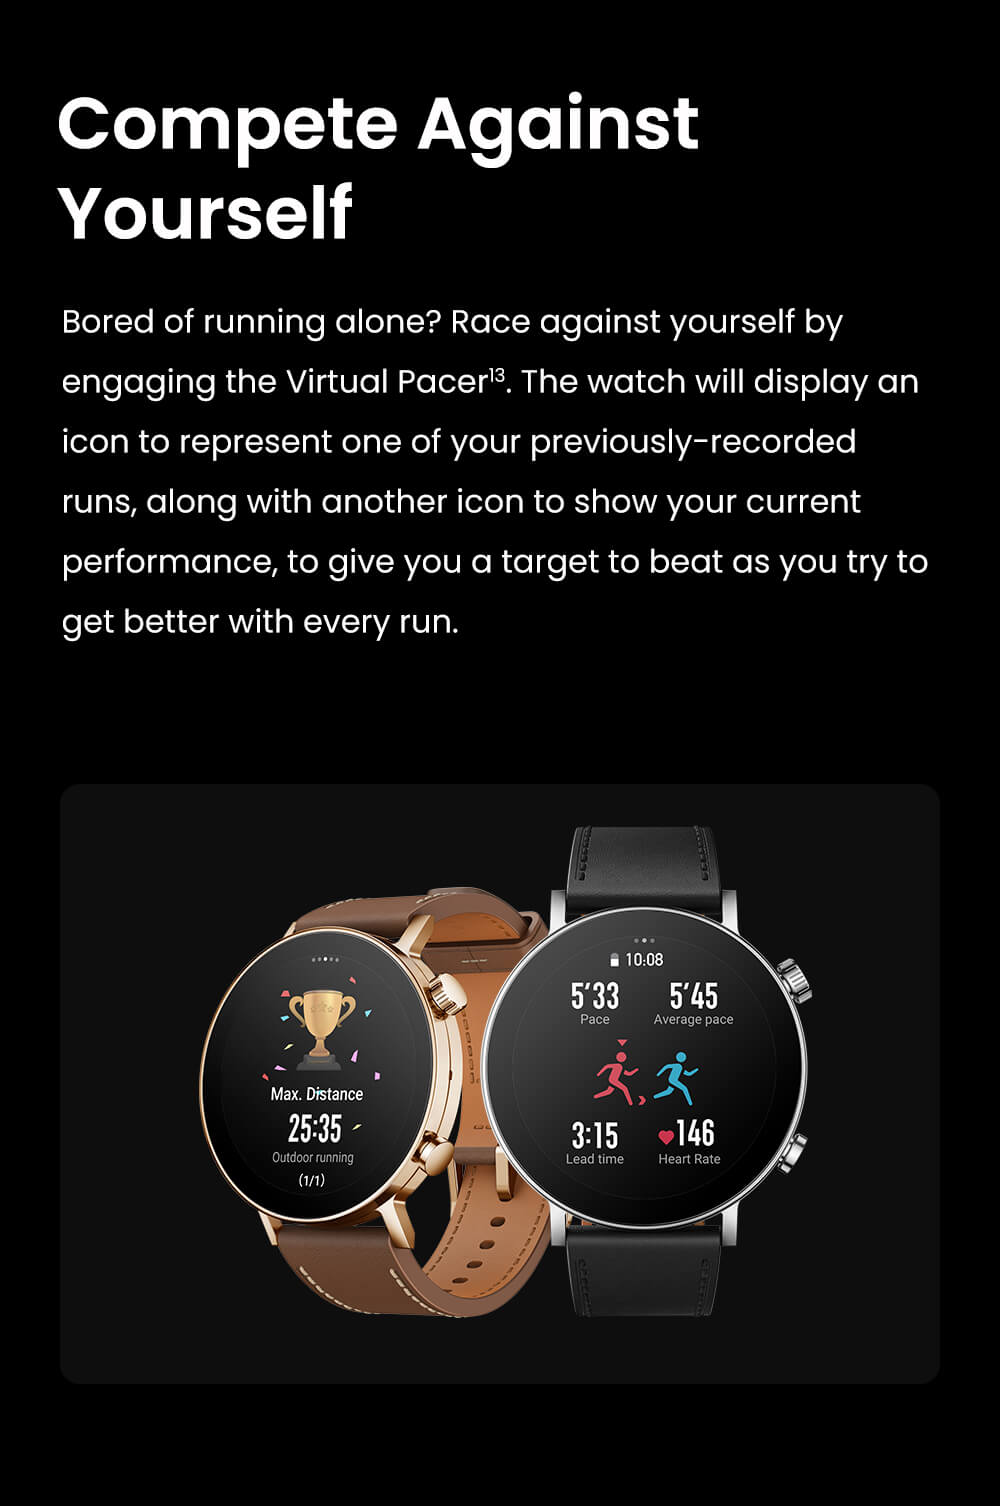 Amazfit refreshes GT series, adds a higher-end $230 GTR 3 Pro to the lineup  - CNET